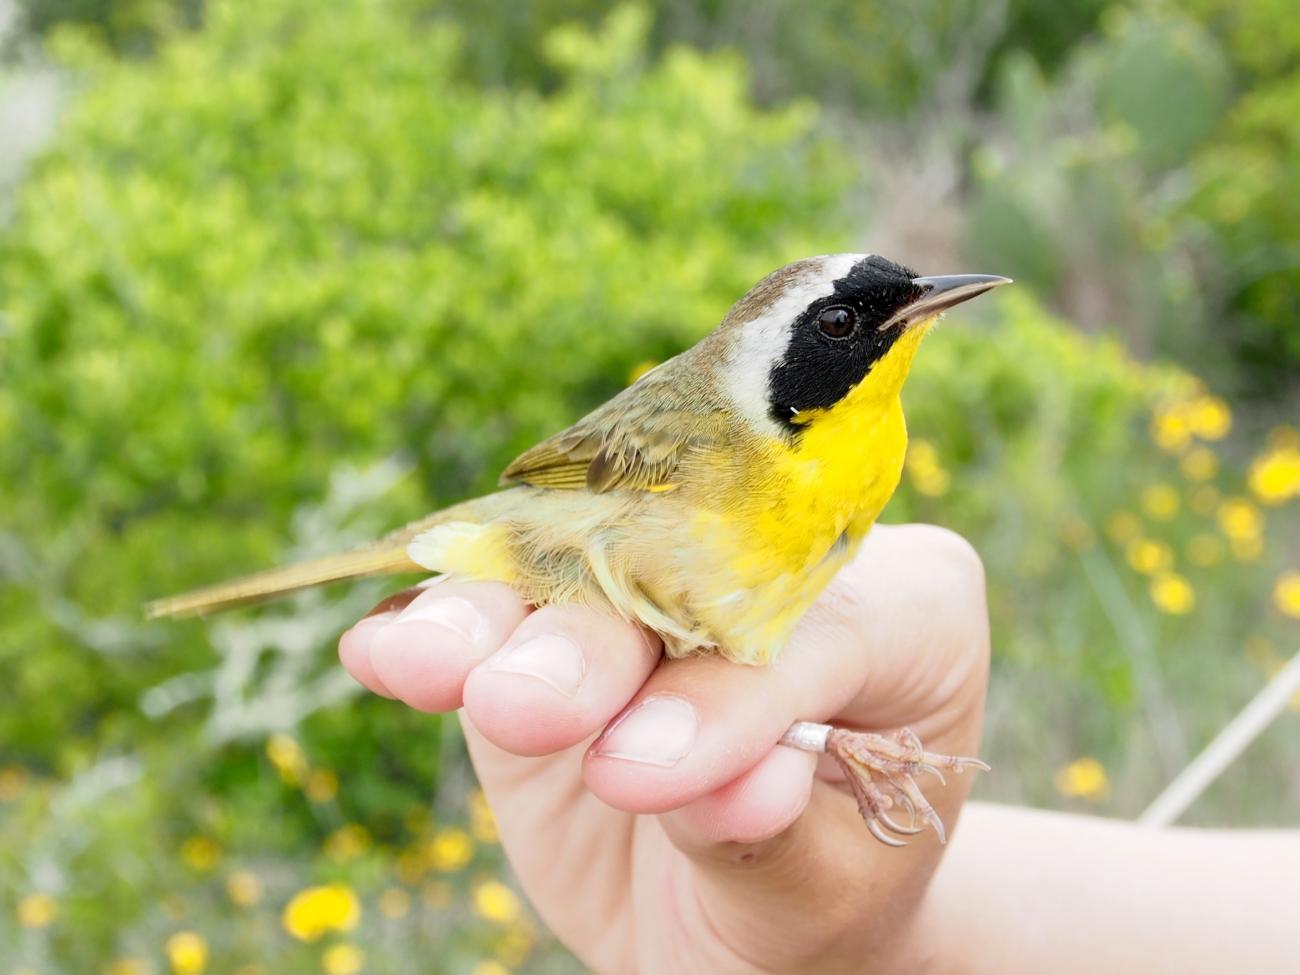 A common yellowthroat songbird in someone's hand